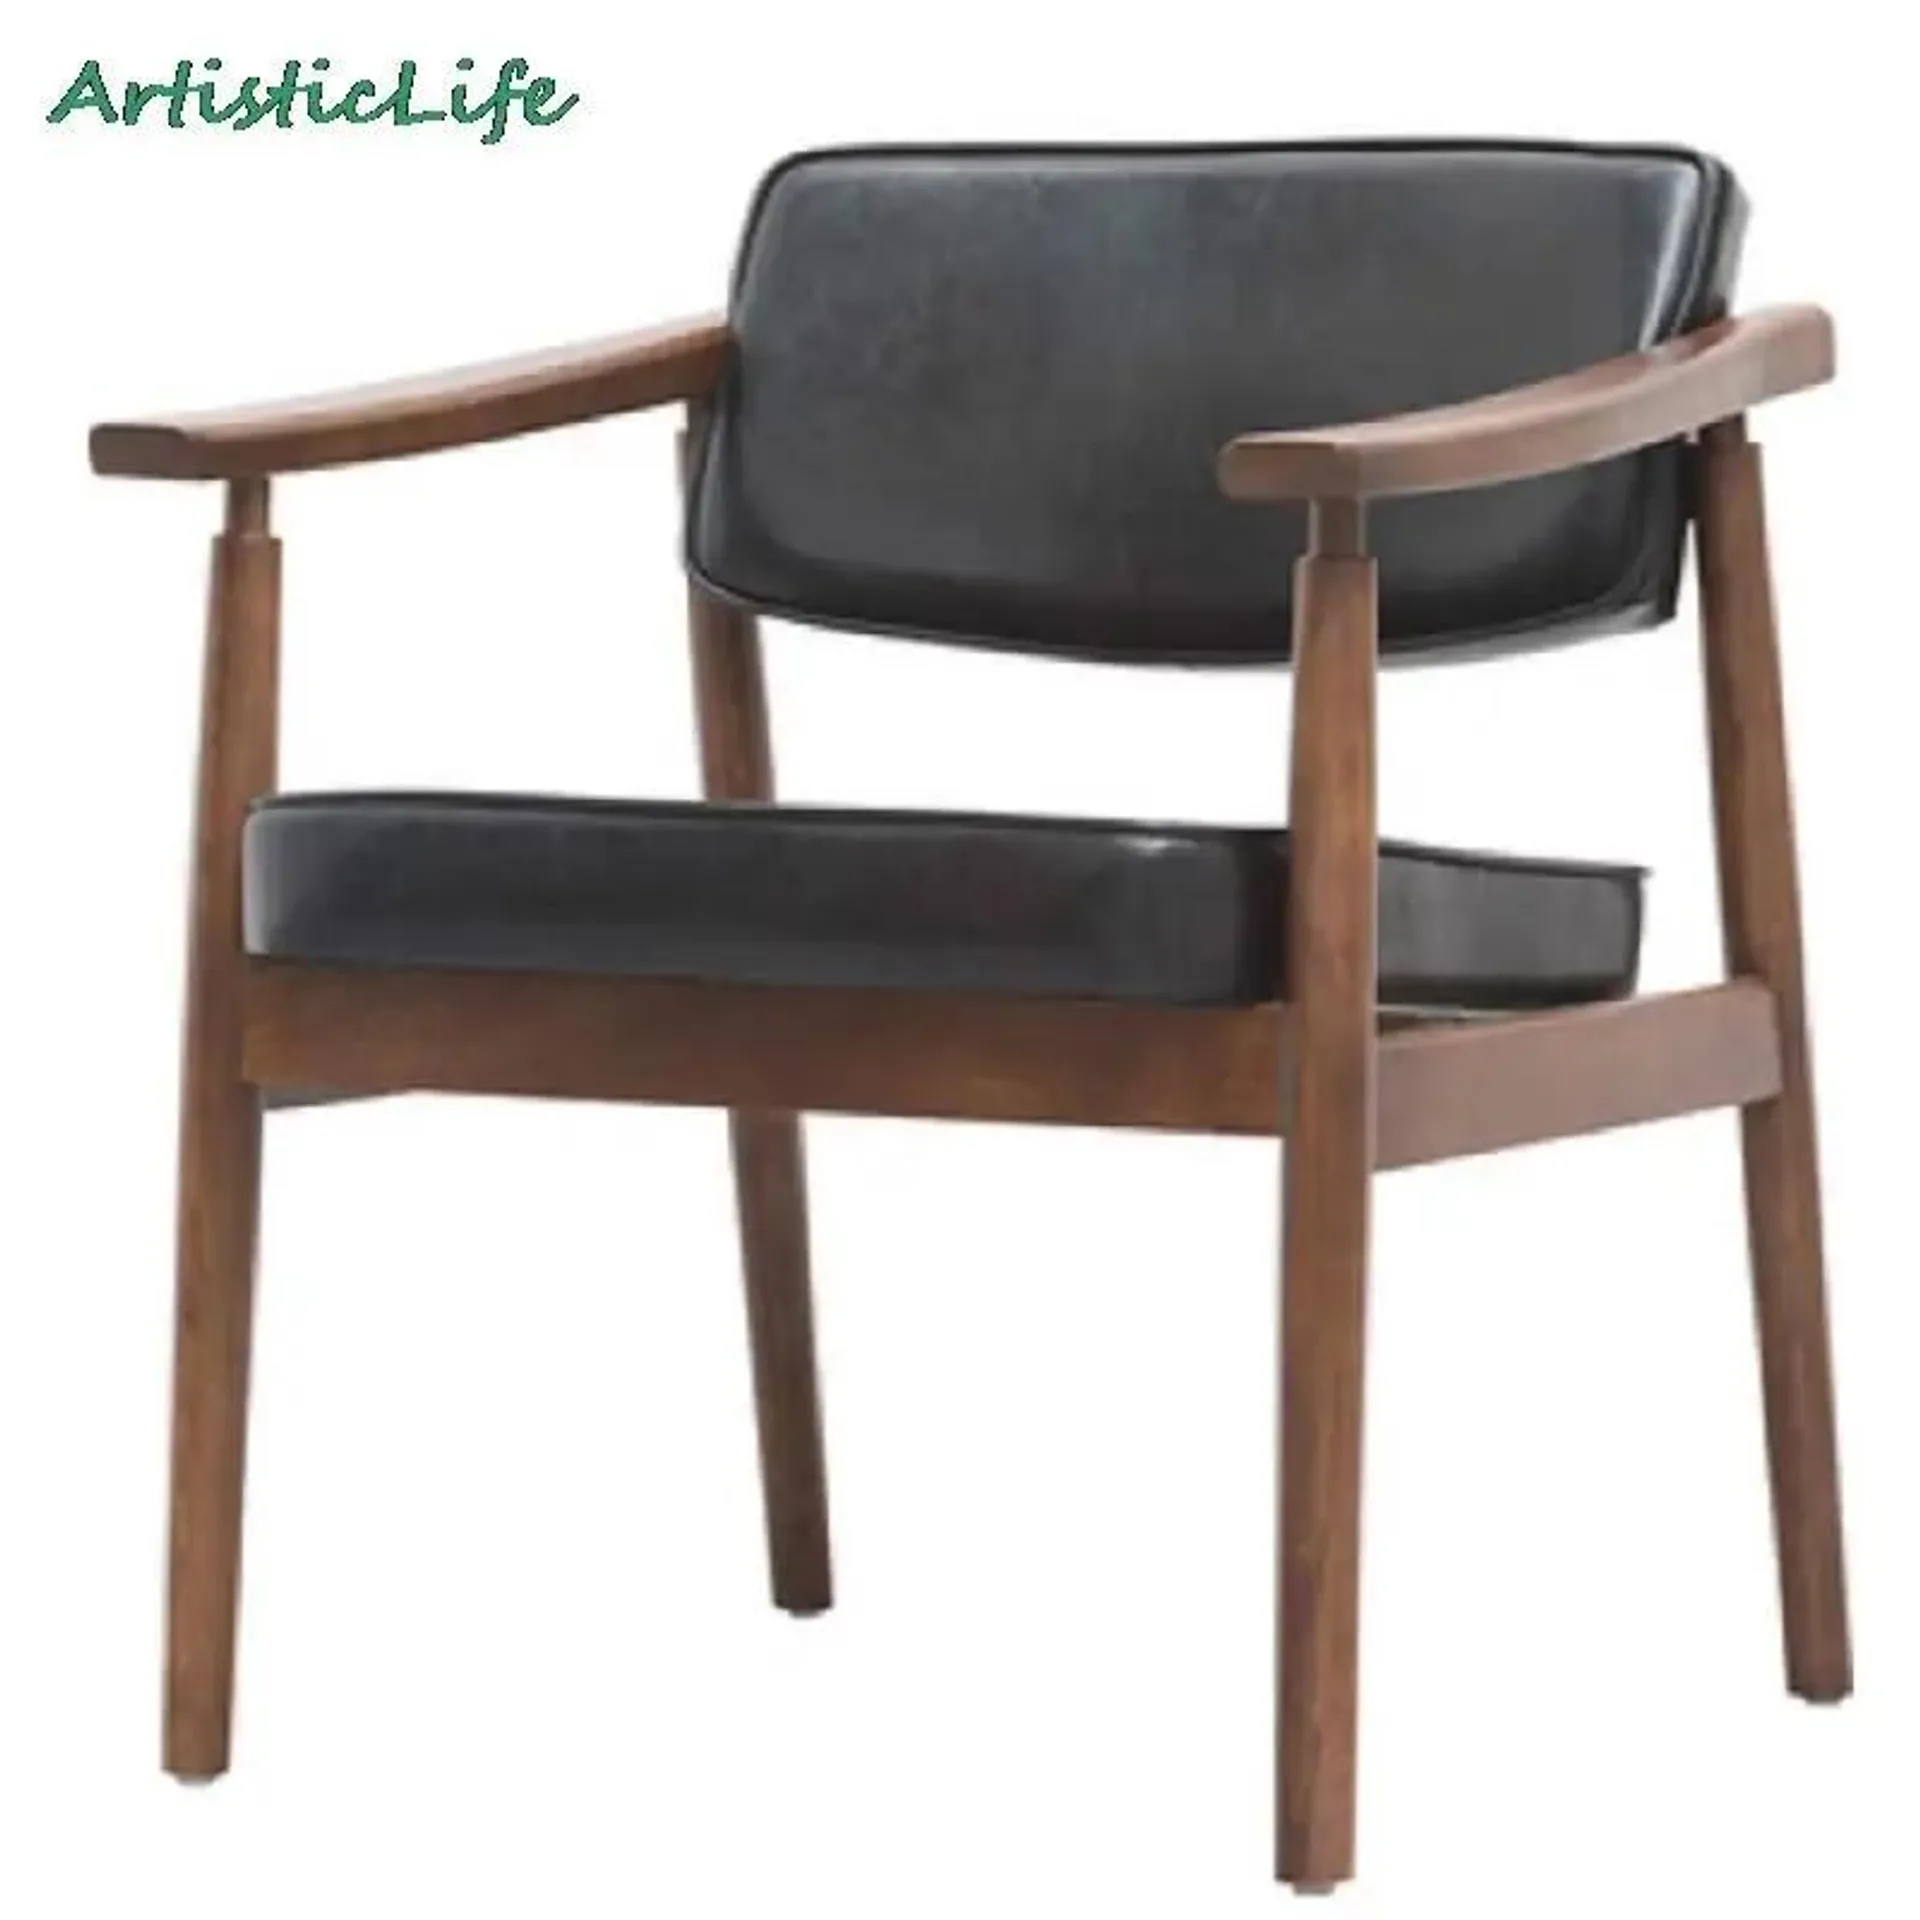 ArtisticLife Japanese Oak Dining Chair Solid Wood Retro Armrest Backrest Lounge Chair Home Computer Chair Single Sofa Chair